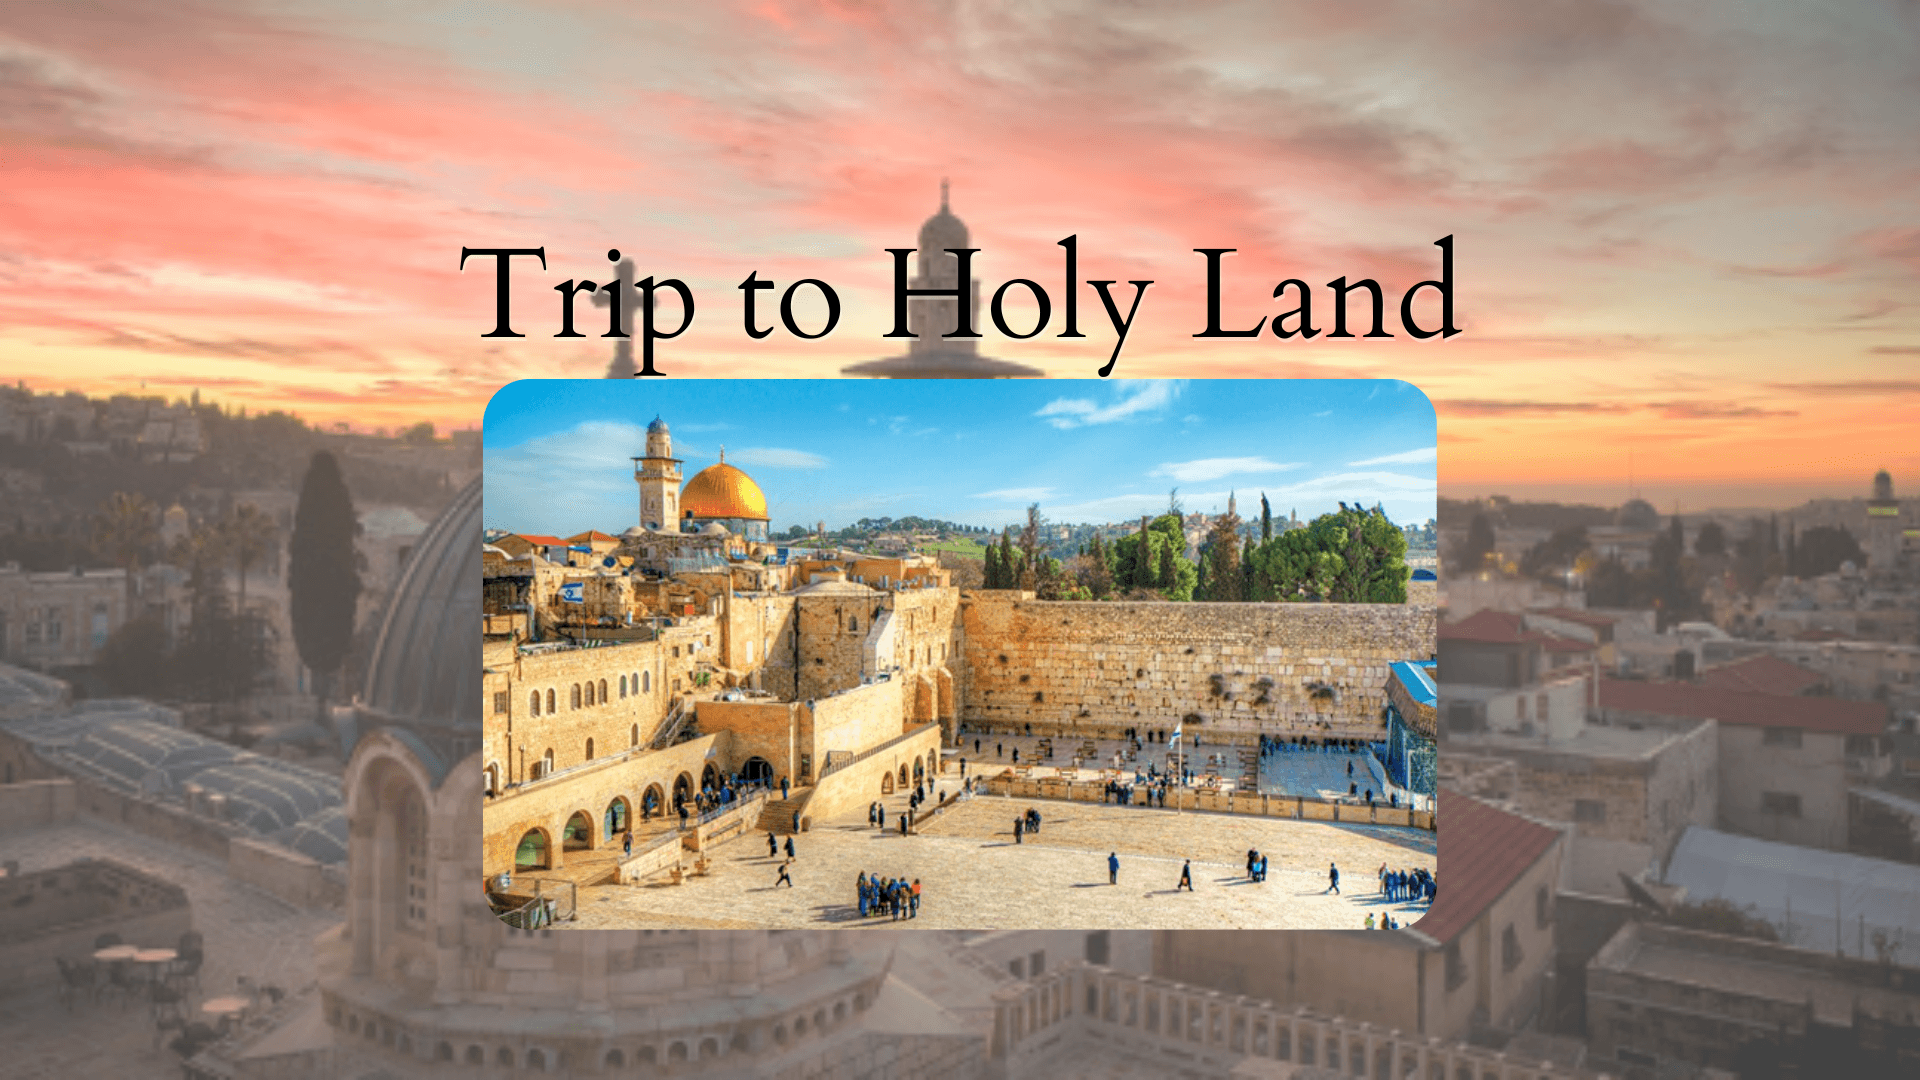 Trip to the Holy Land with an image of the Jerusalem